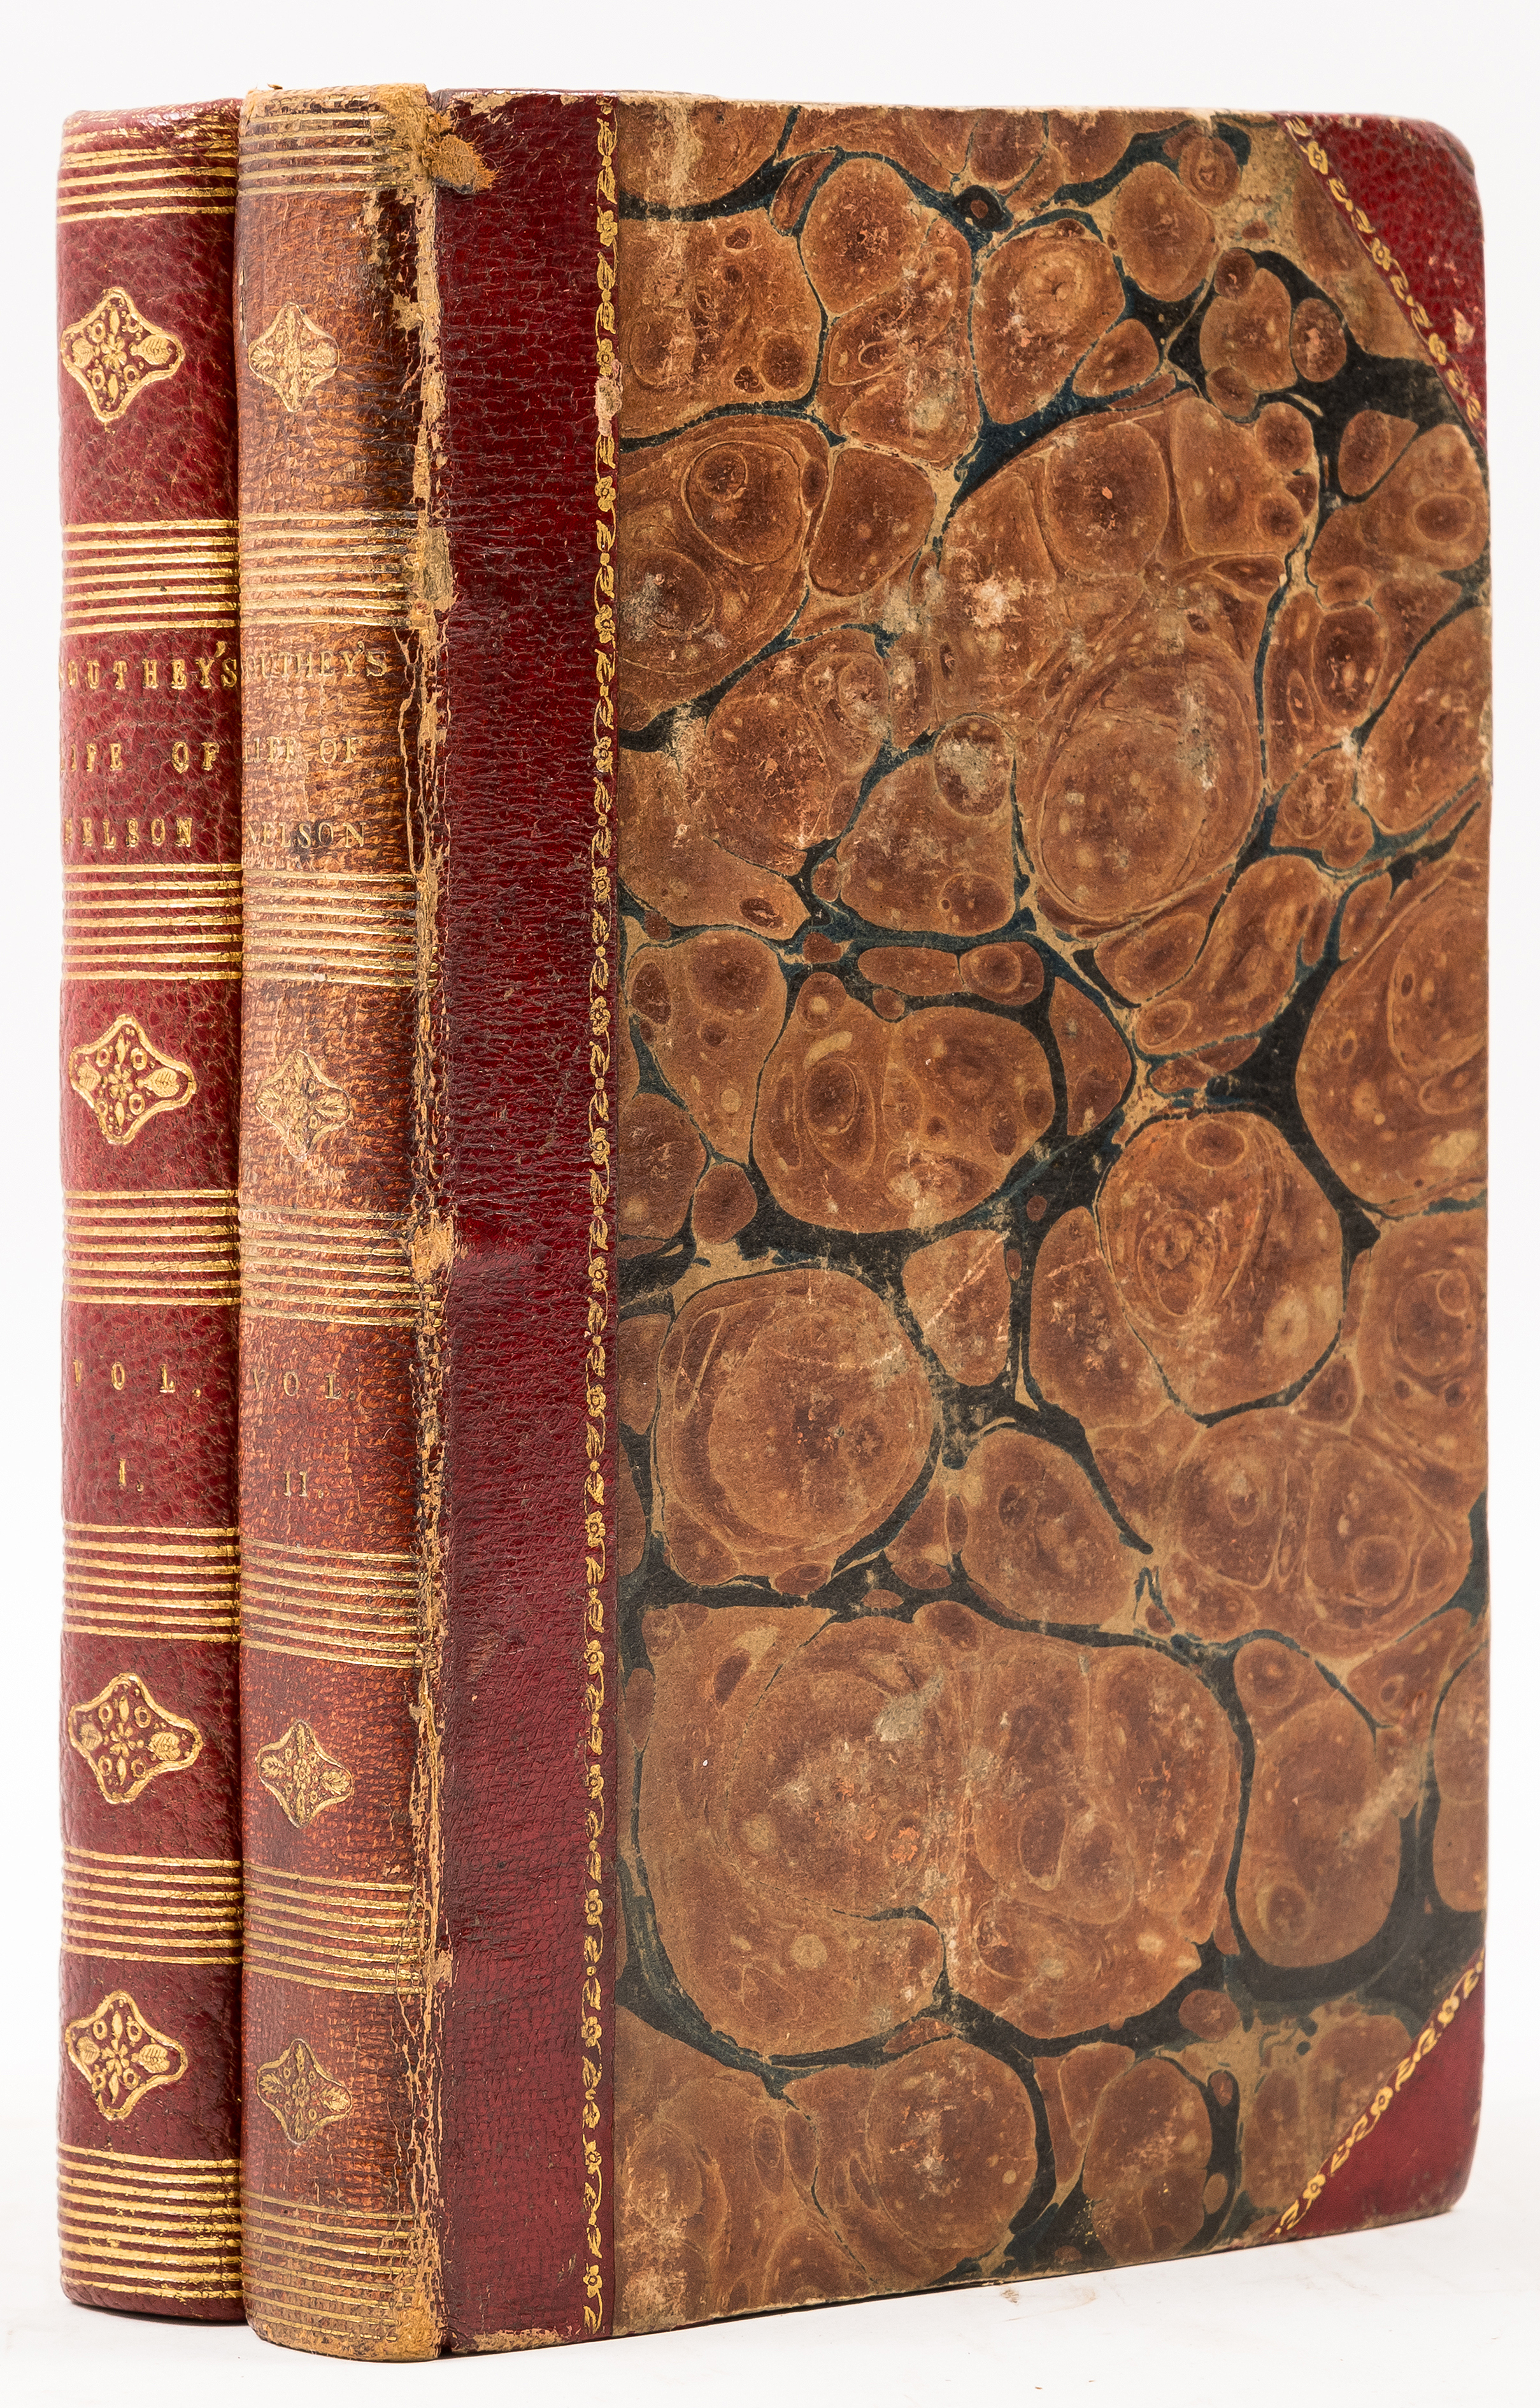 Southey (Robert) The Life of Nelson, 2 vol., first edition, 1813.